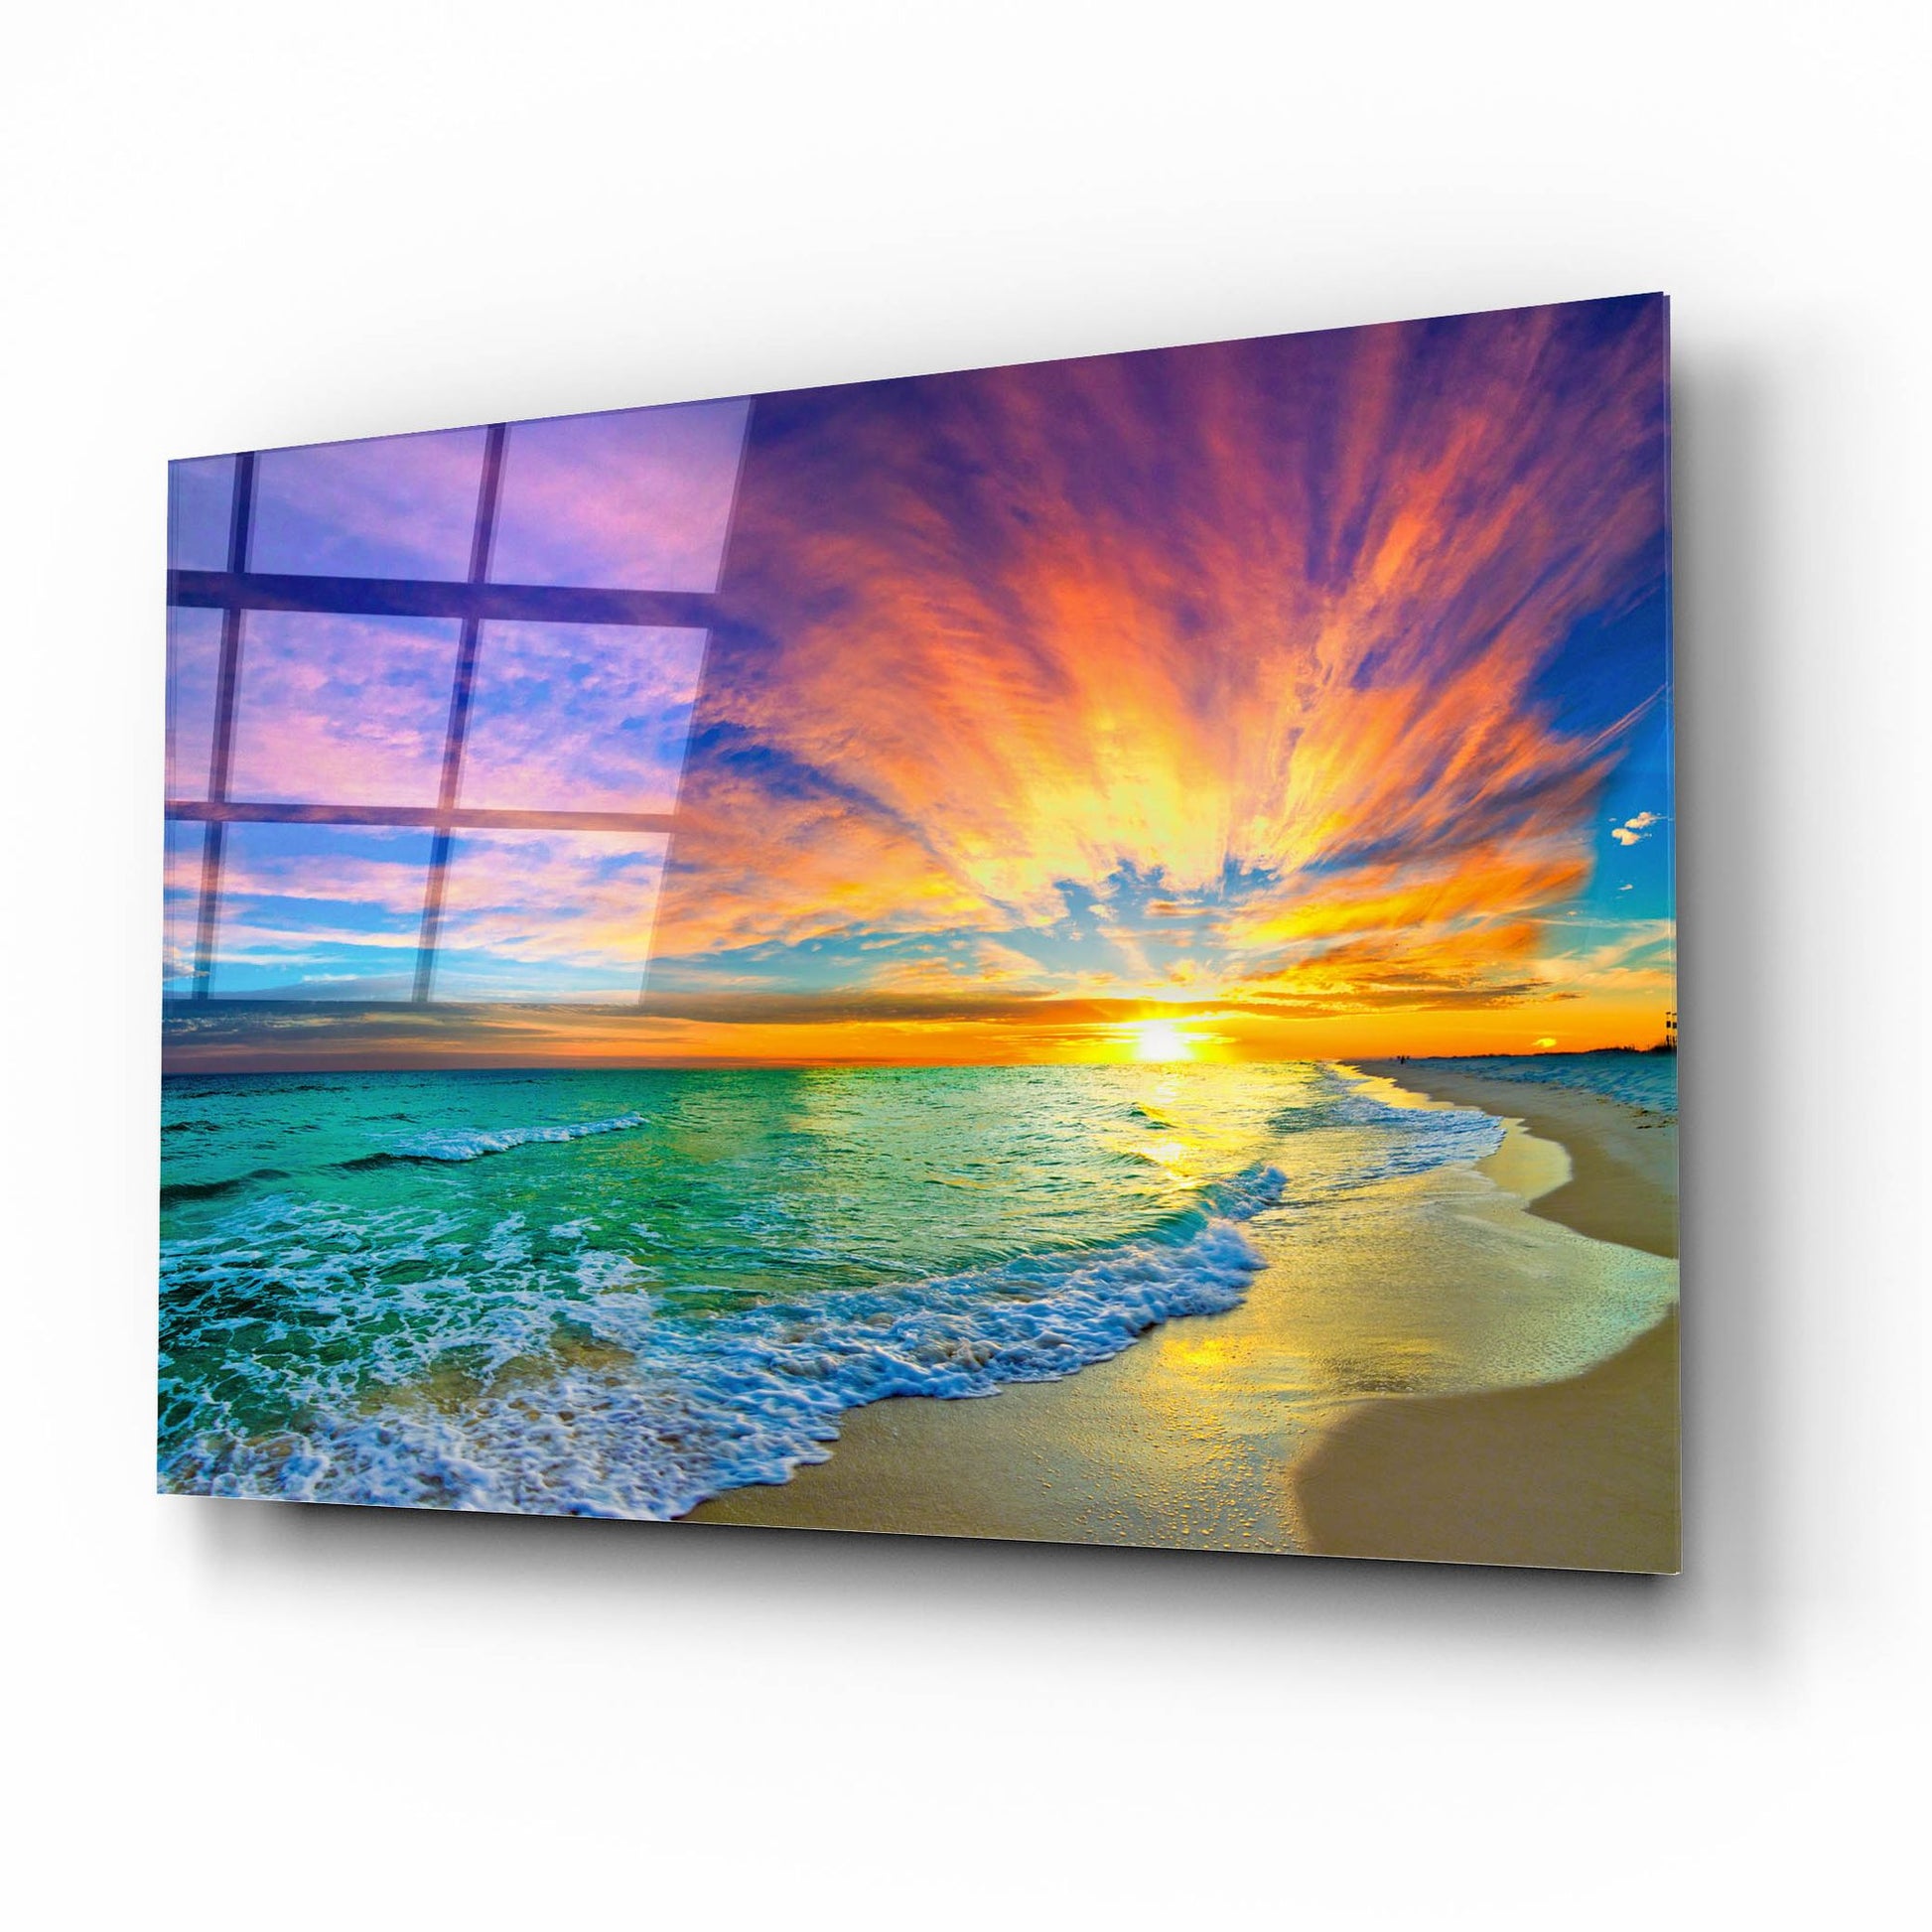 Epic Art 'Colorful Ocean Sunset Orange And Red Beach Sunset' by Ezra Tanner, Acrylic Glass Wall Art,16x12